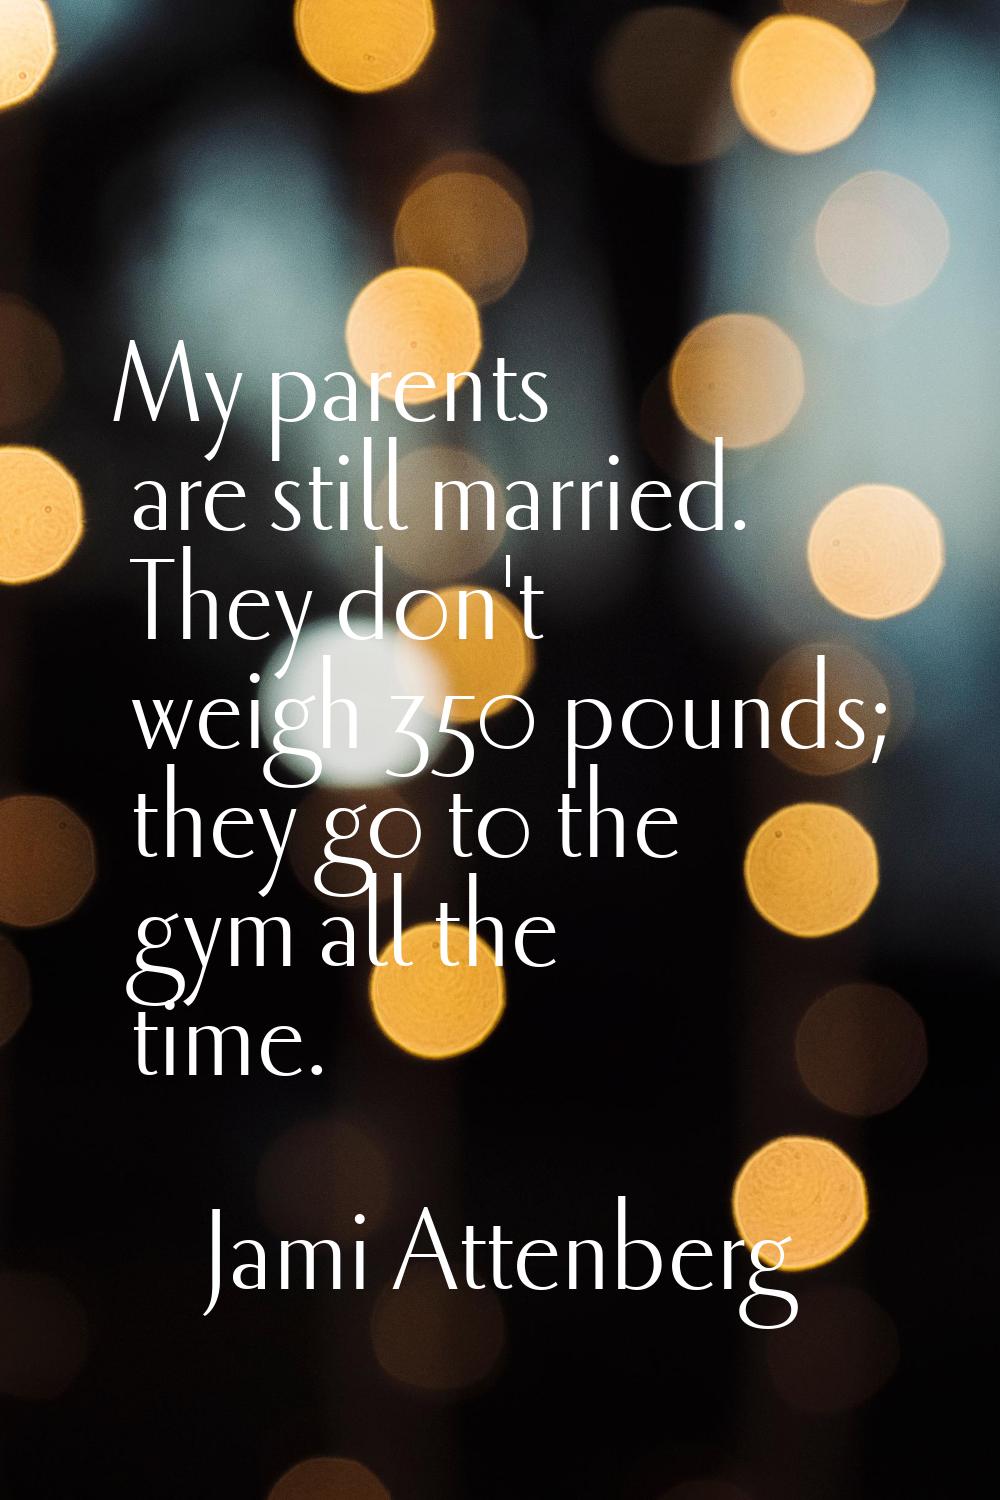 My parents are still married. They don't weigh 350 pounds; they go to the gym all the time.